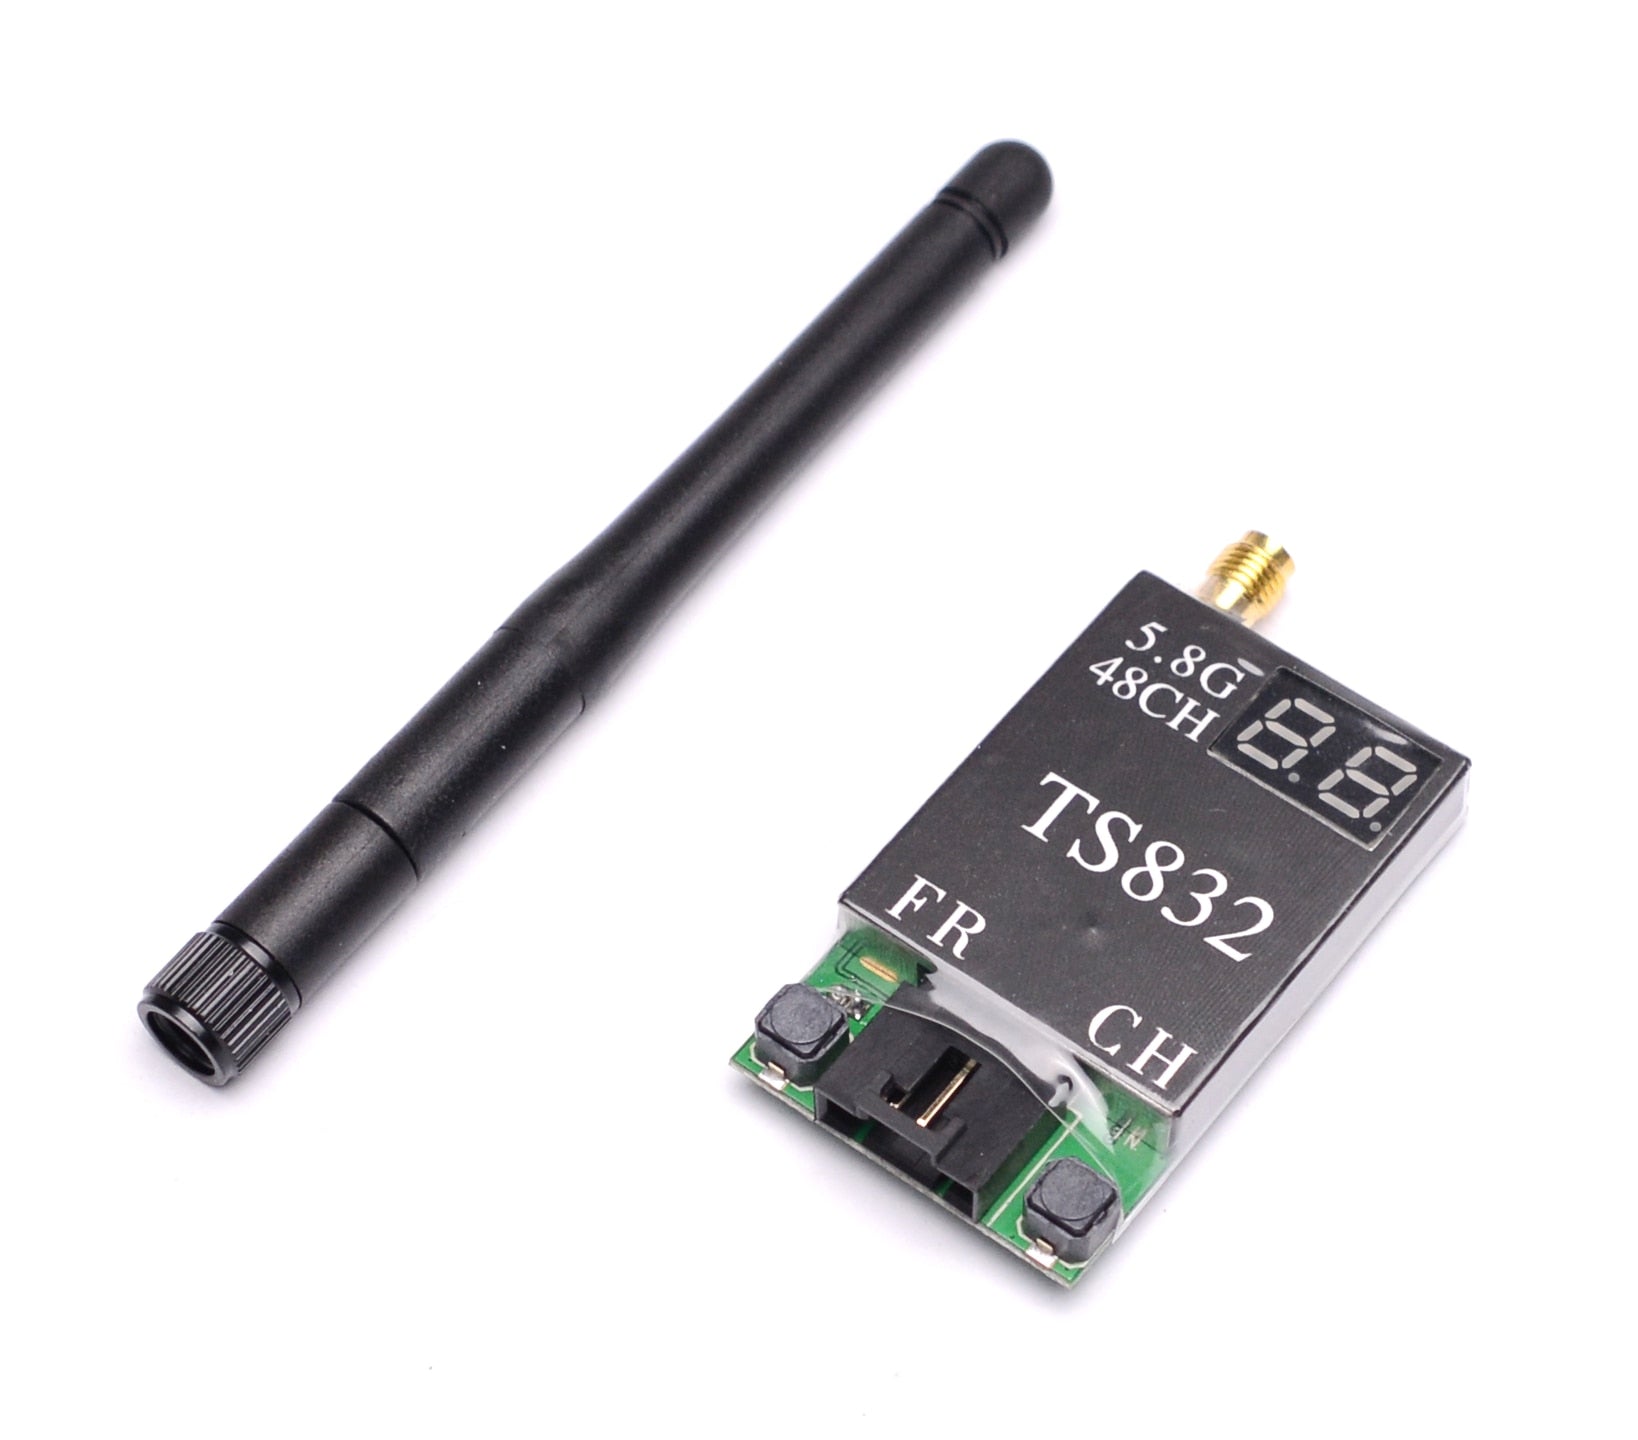 RD945 Skyzone ISM 5.8G Wireless Dual Receiver & TS832 Transmitter 5.8GHz 48CH VTX For 250MM FPV Multicopter RC Toys Part